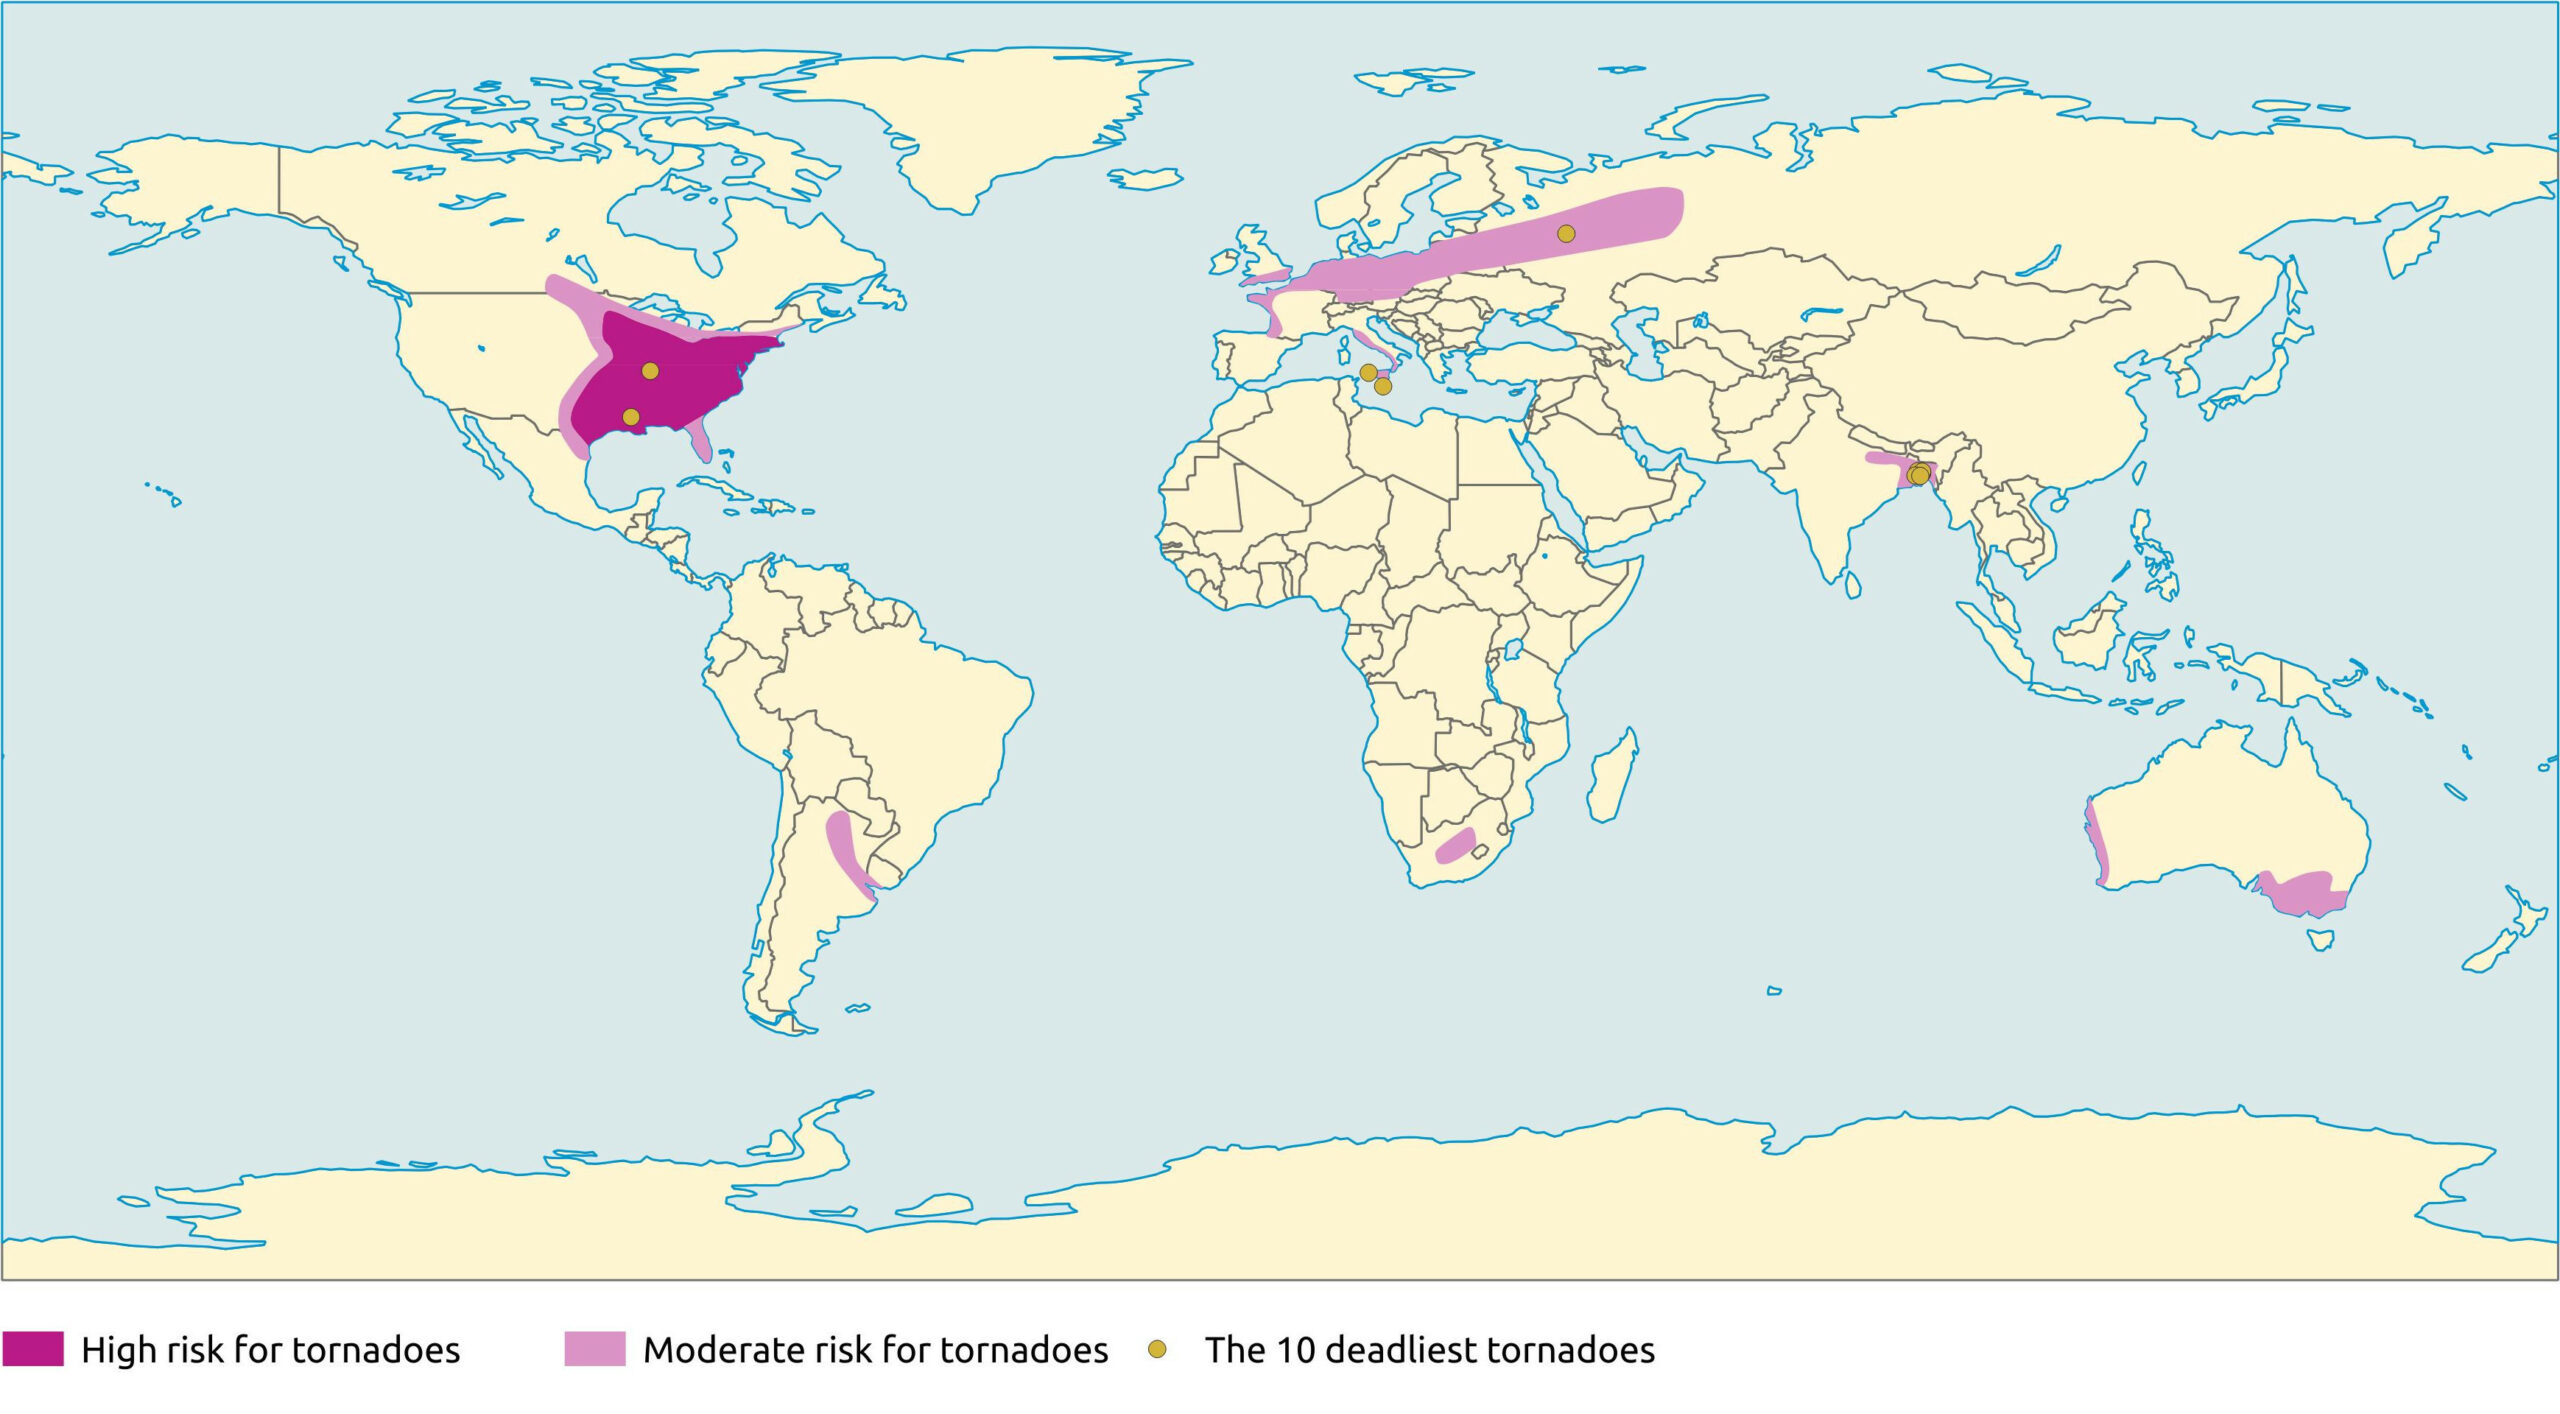 Tornado risk map of the world and of the 10 deadliest tornadoes in the world